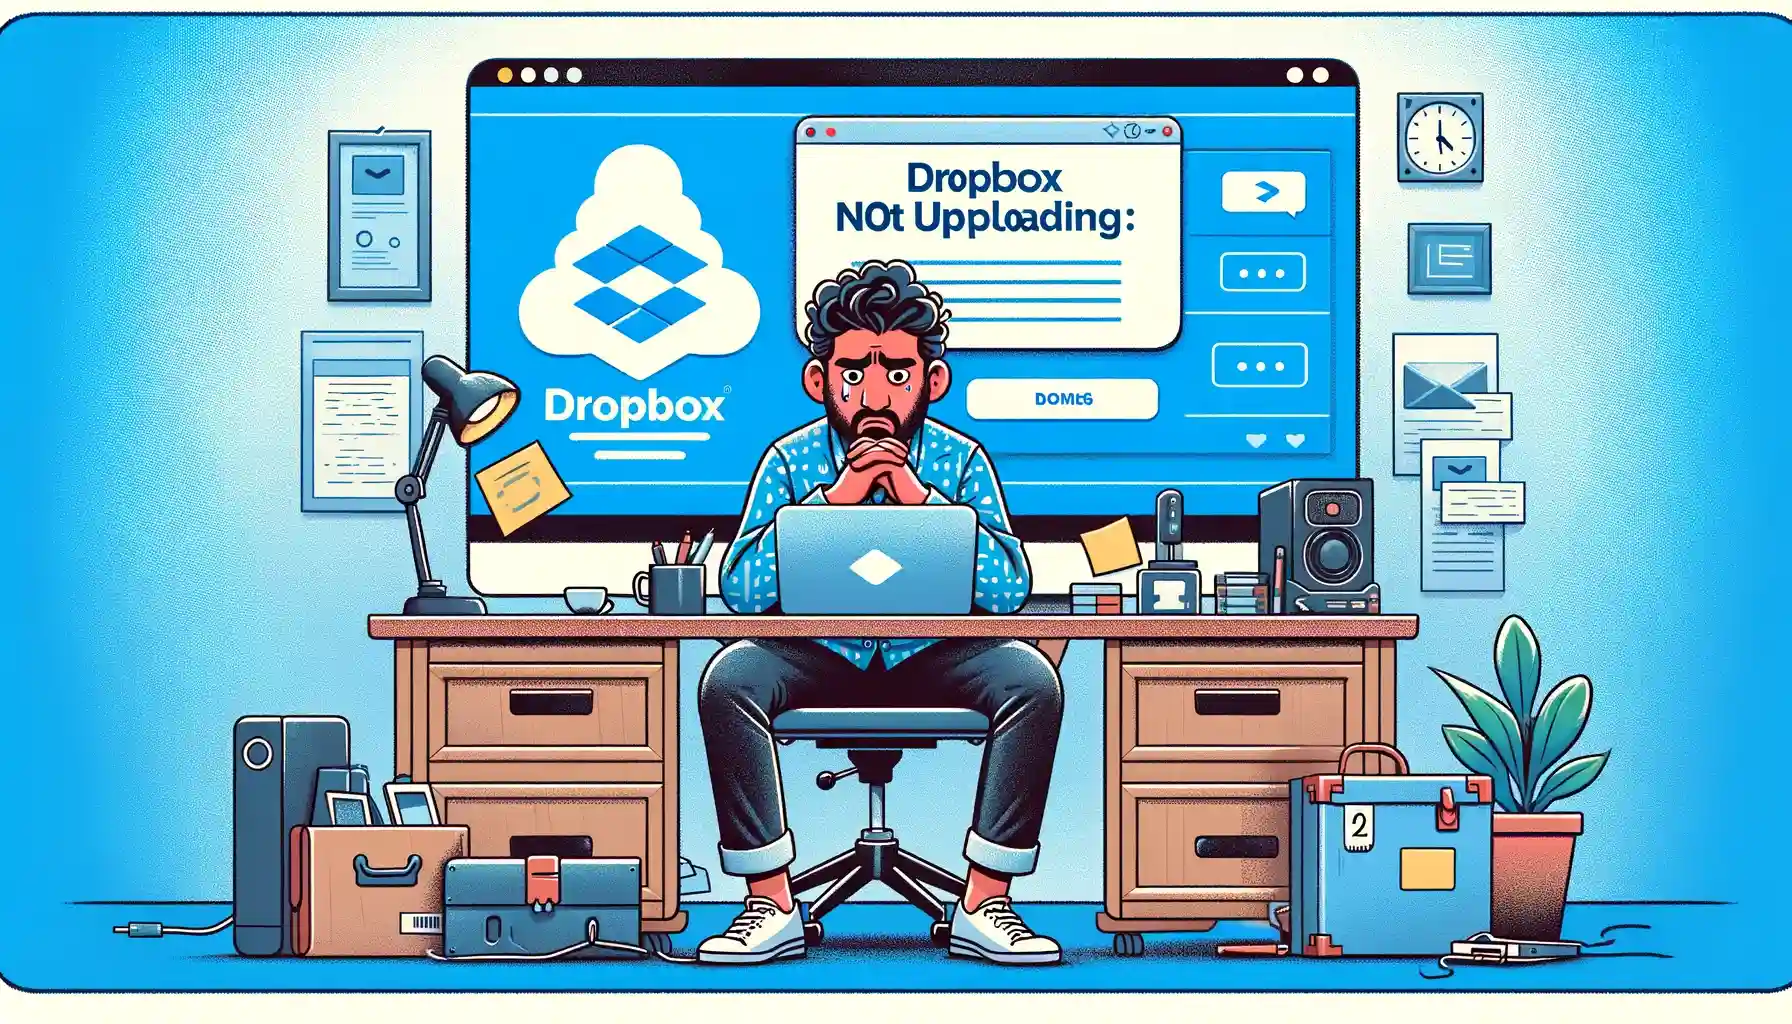 Dropbox Not Uploading: Troubleshooting and Solutions